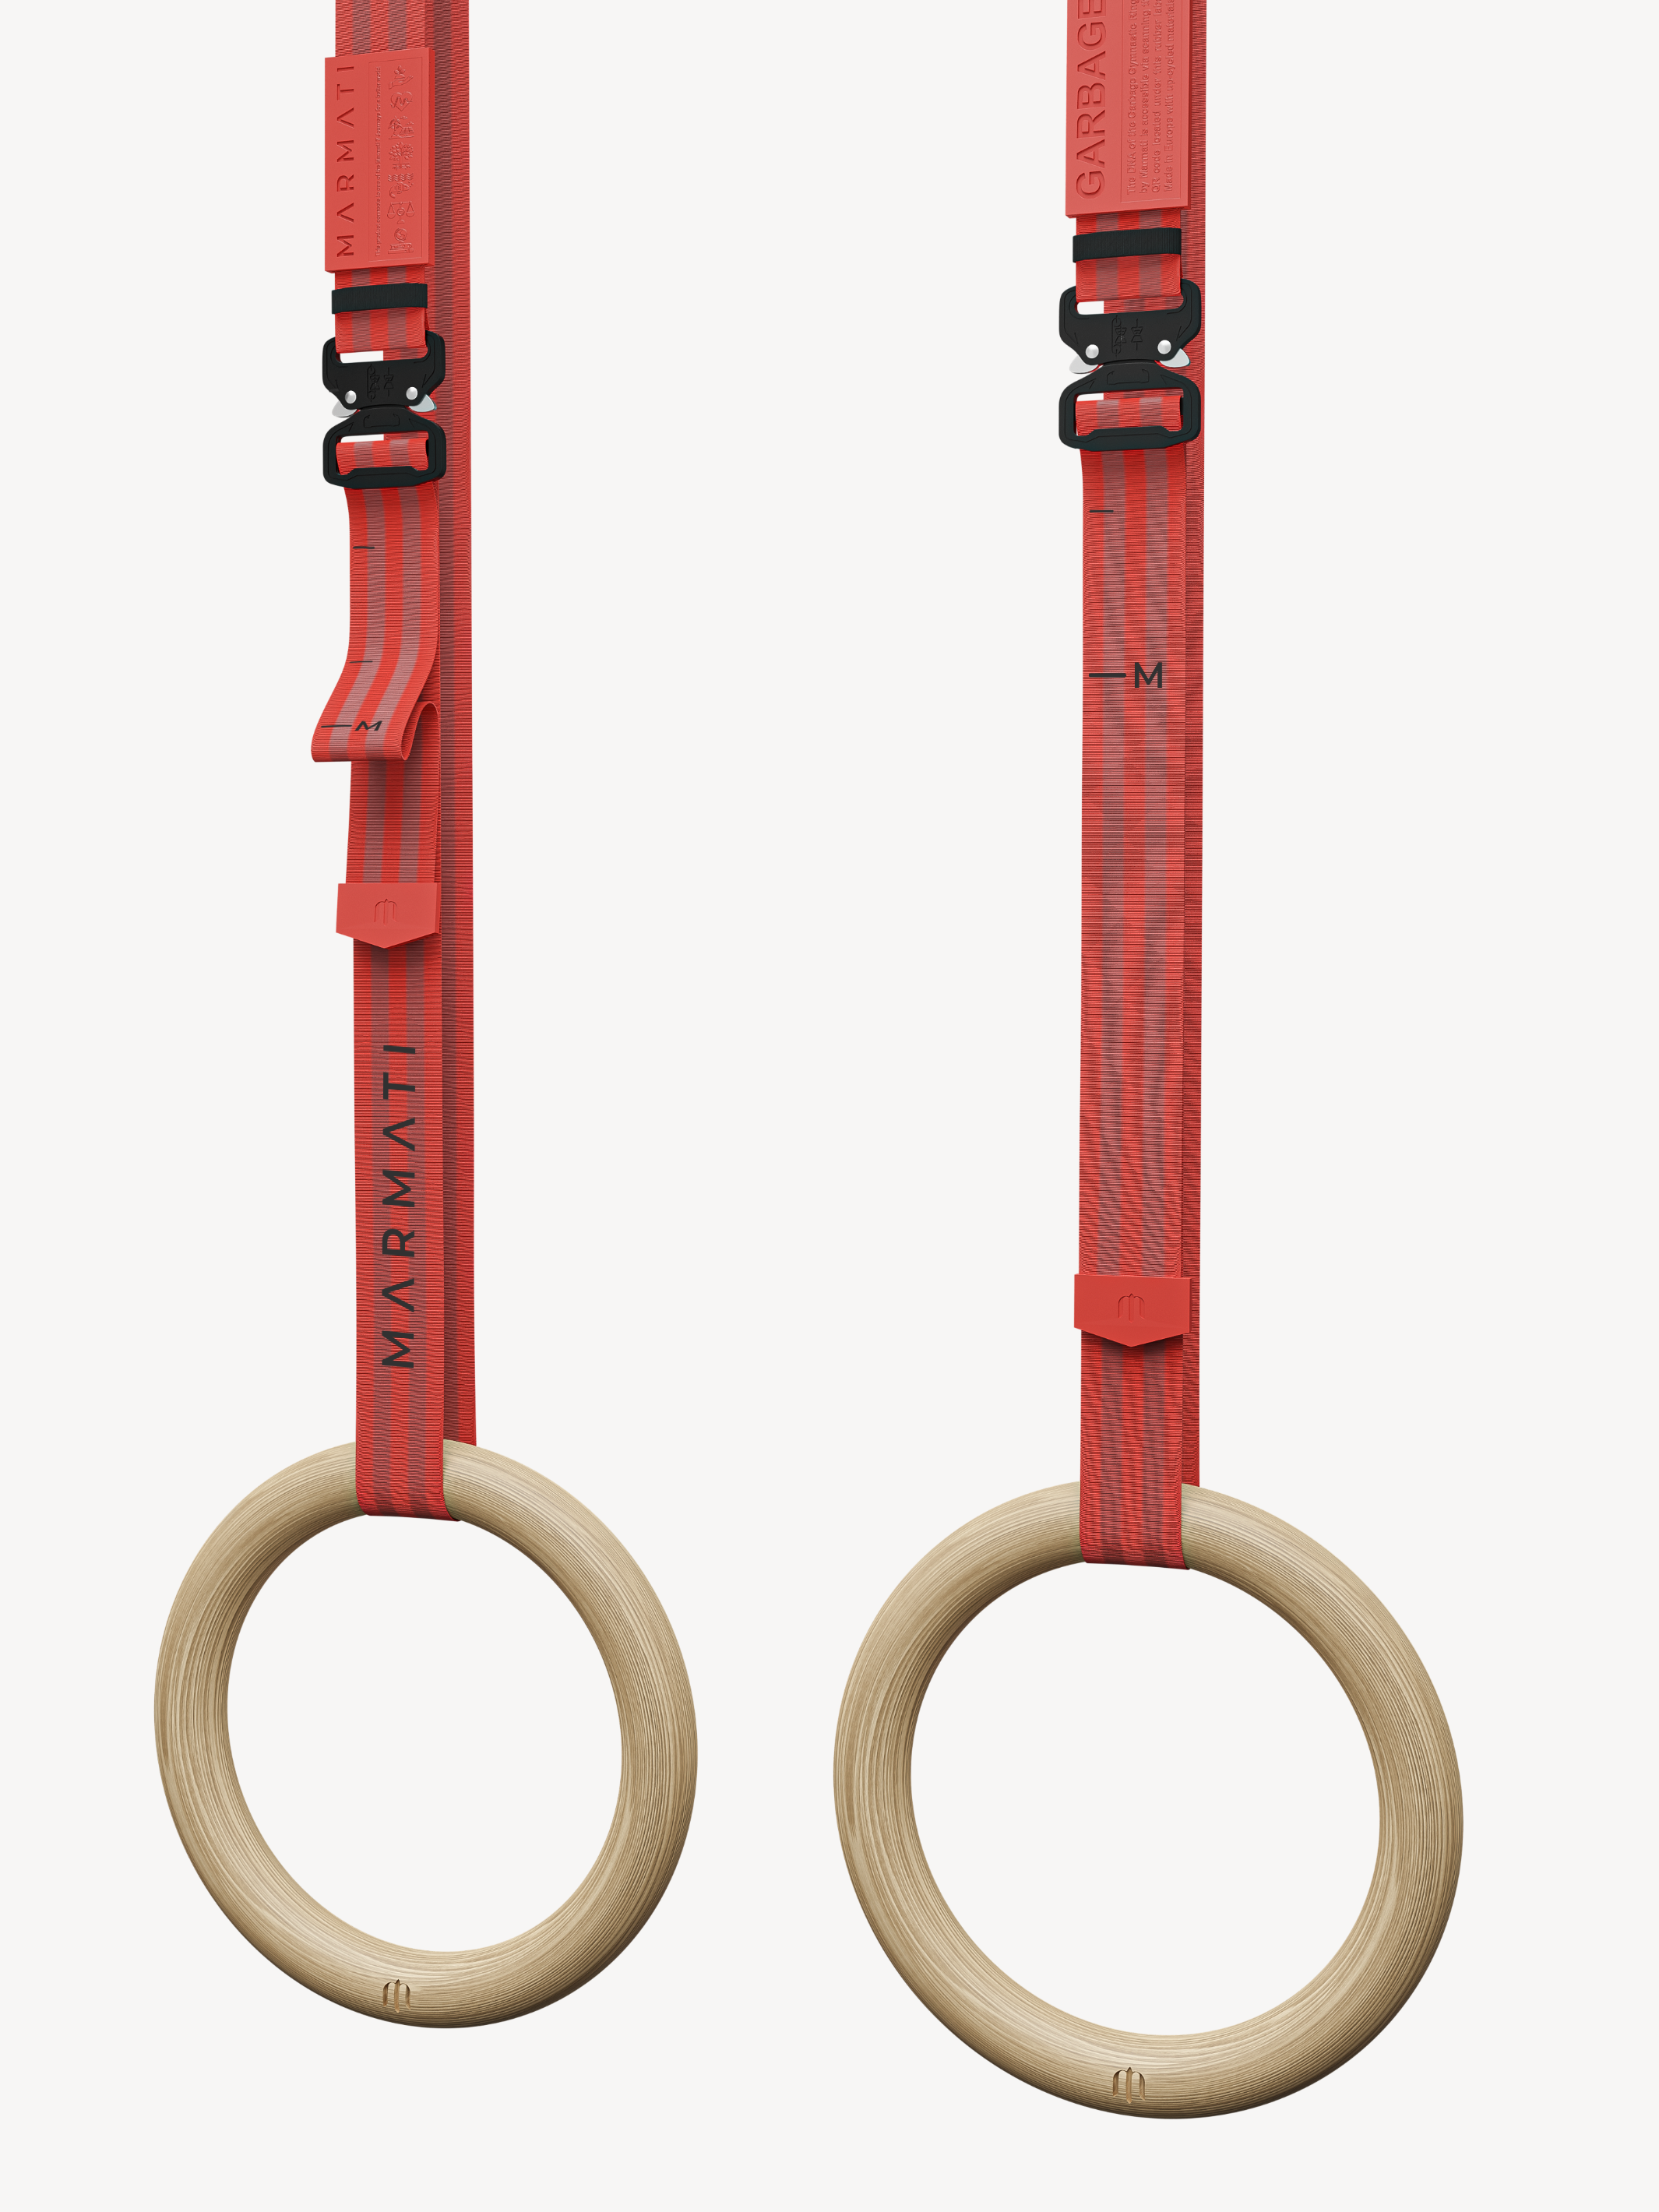 Discover new challenges and take your workout to the next level with GARBAGE GYMNASTIC RINGS! Not only do you enjoy the versatility they bring to your exercise routine, but you also help support good causes with your purchase. Maximize your movement and make an impact with GARBAGE GYMNASTIC RINGS in RED!